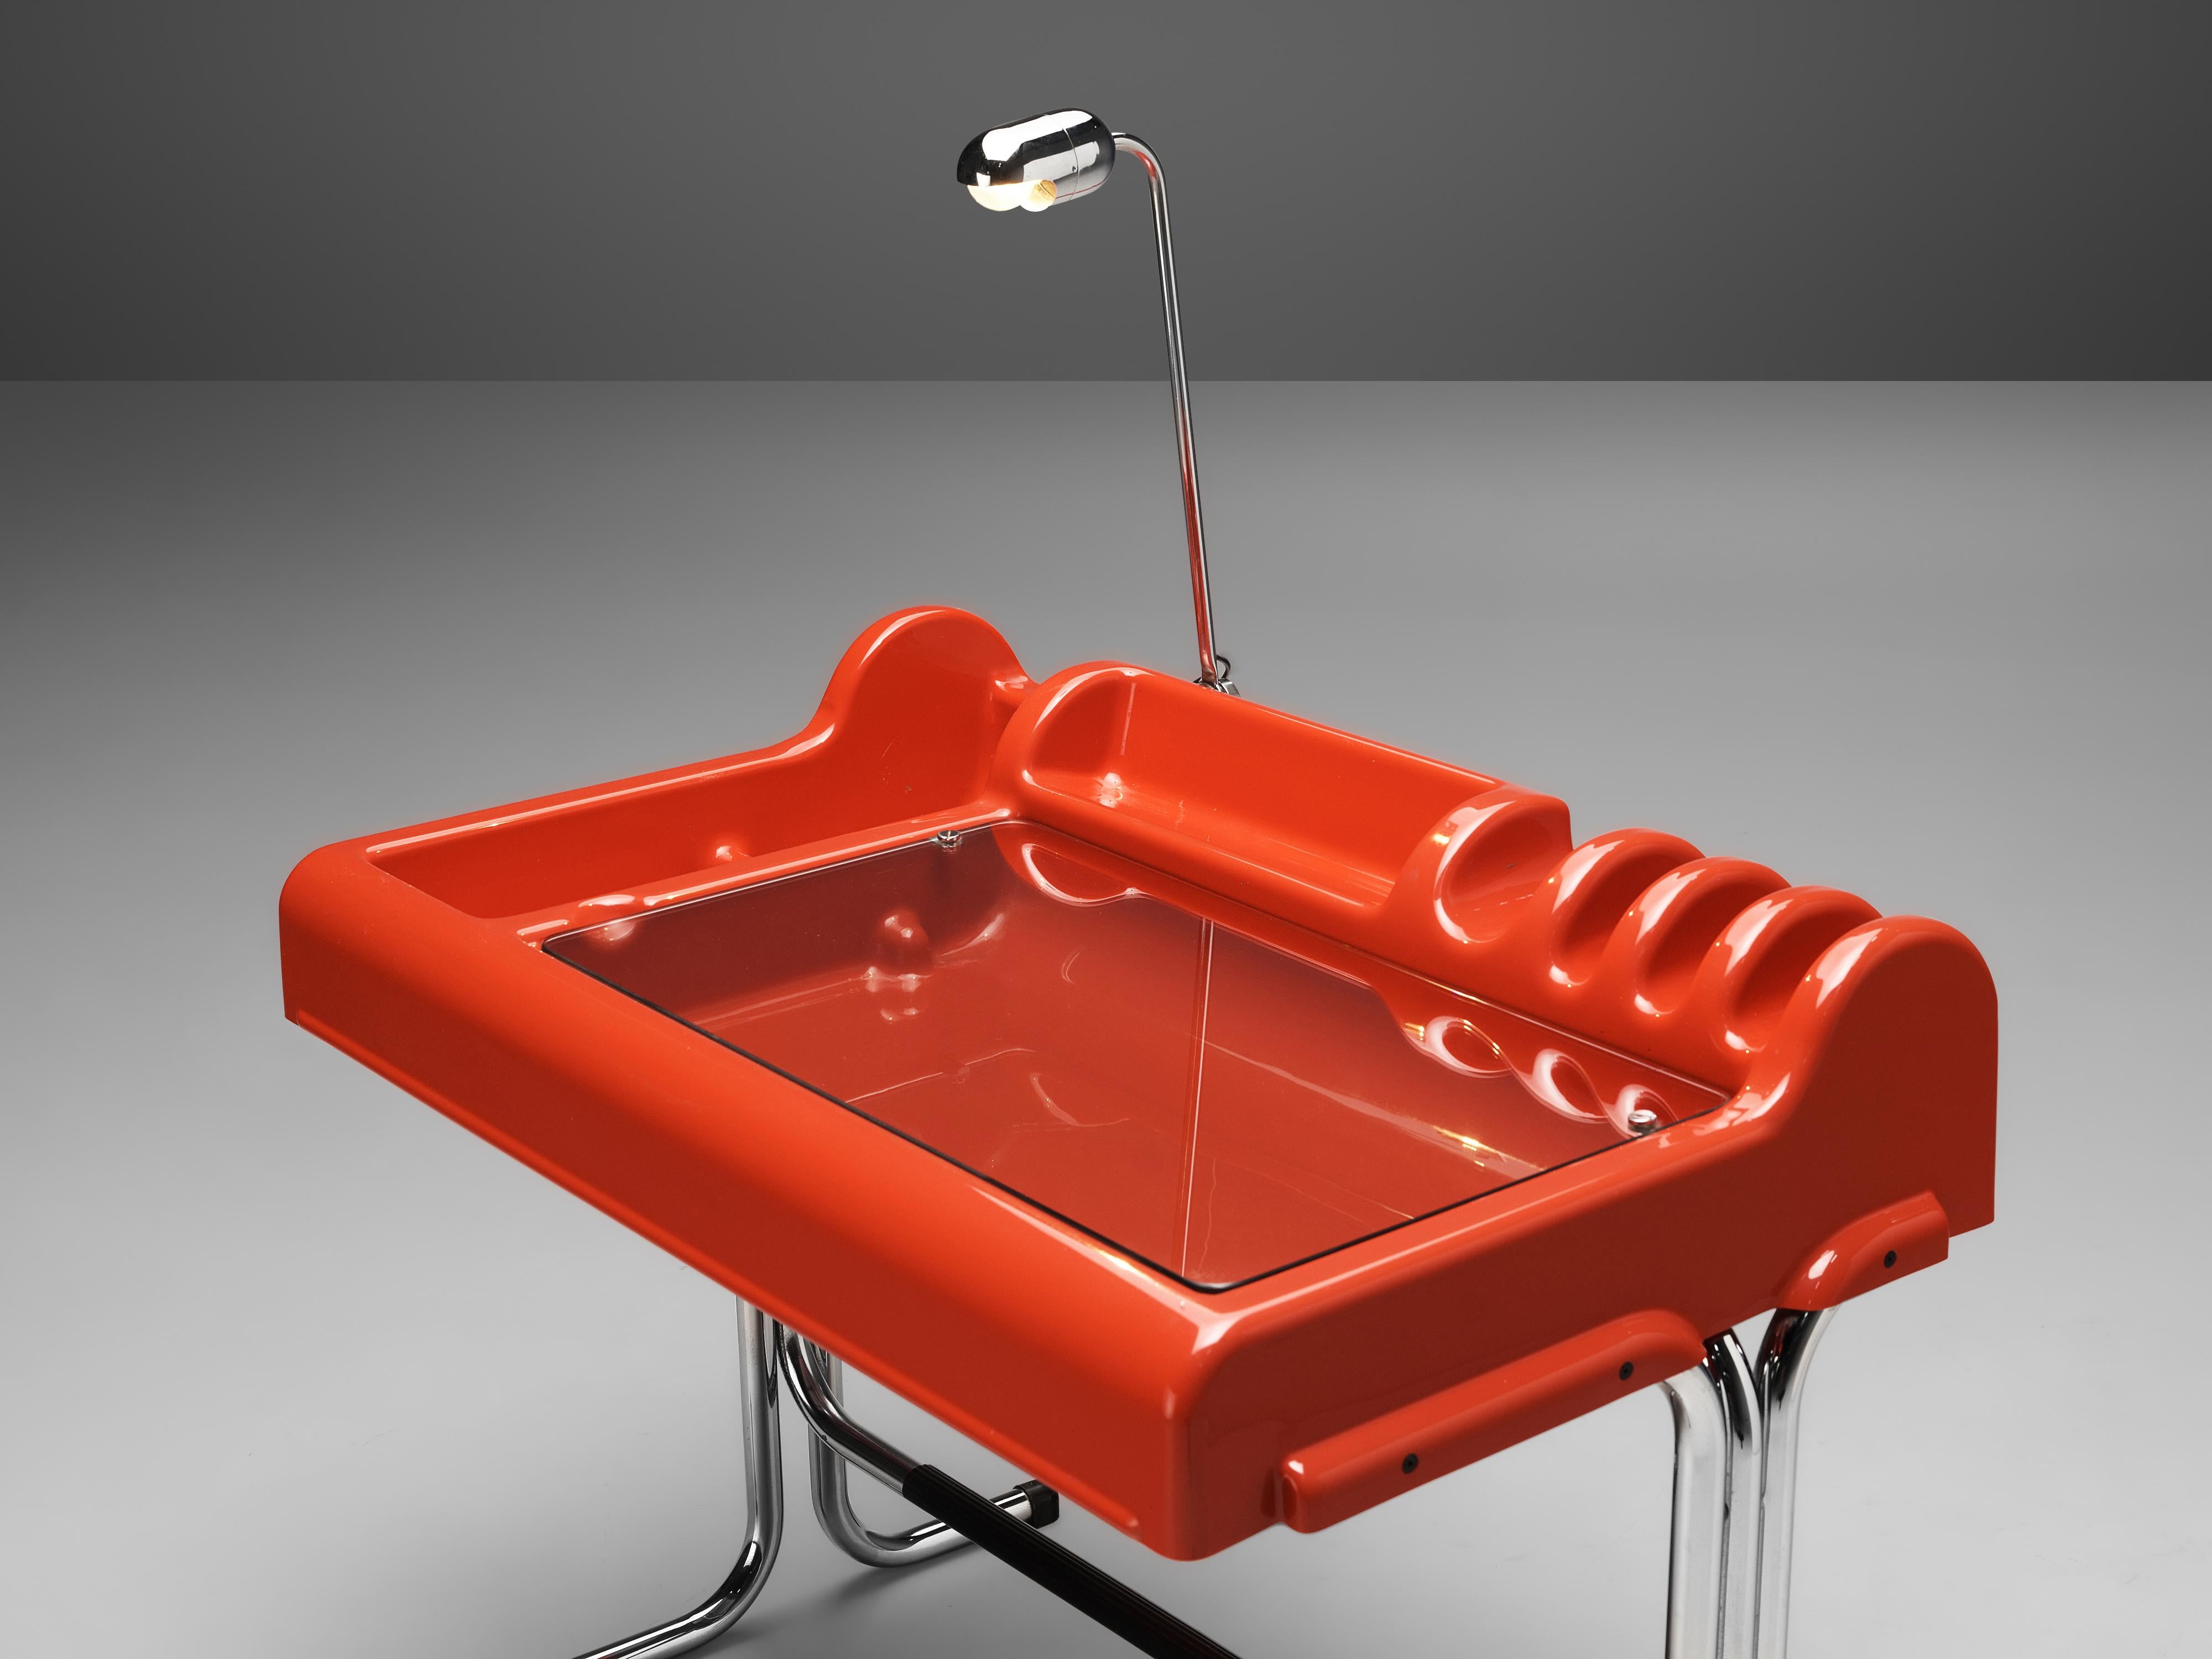 Vittorio Parigi and Nani Prina, 'Orix' desk with lamp, red polyester, chromed steel, glass, leatherette, Italy, 1970.

Postmodern 'Orix' writing desk with chair designed by Vittorio Parigi and Nani Prina. The set is executed in eye-catching red